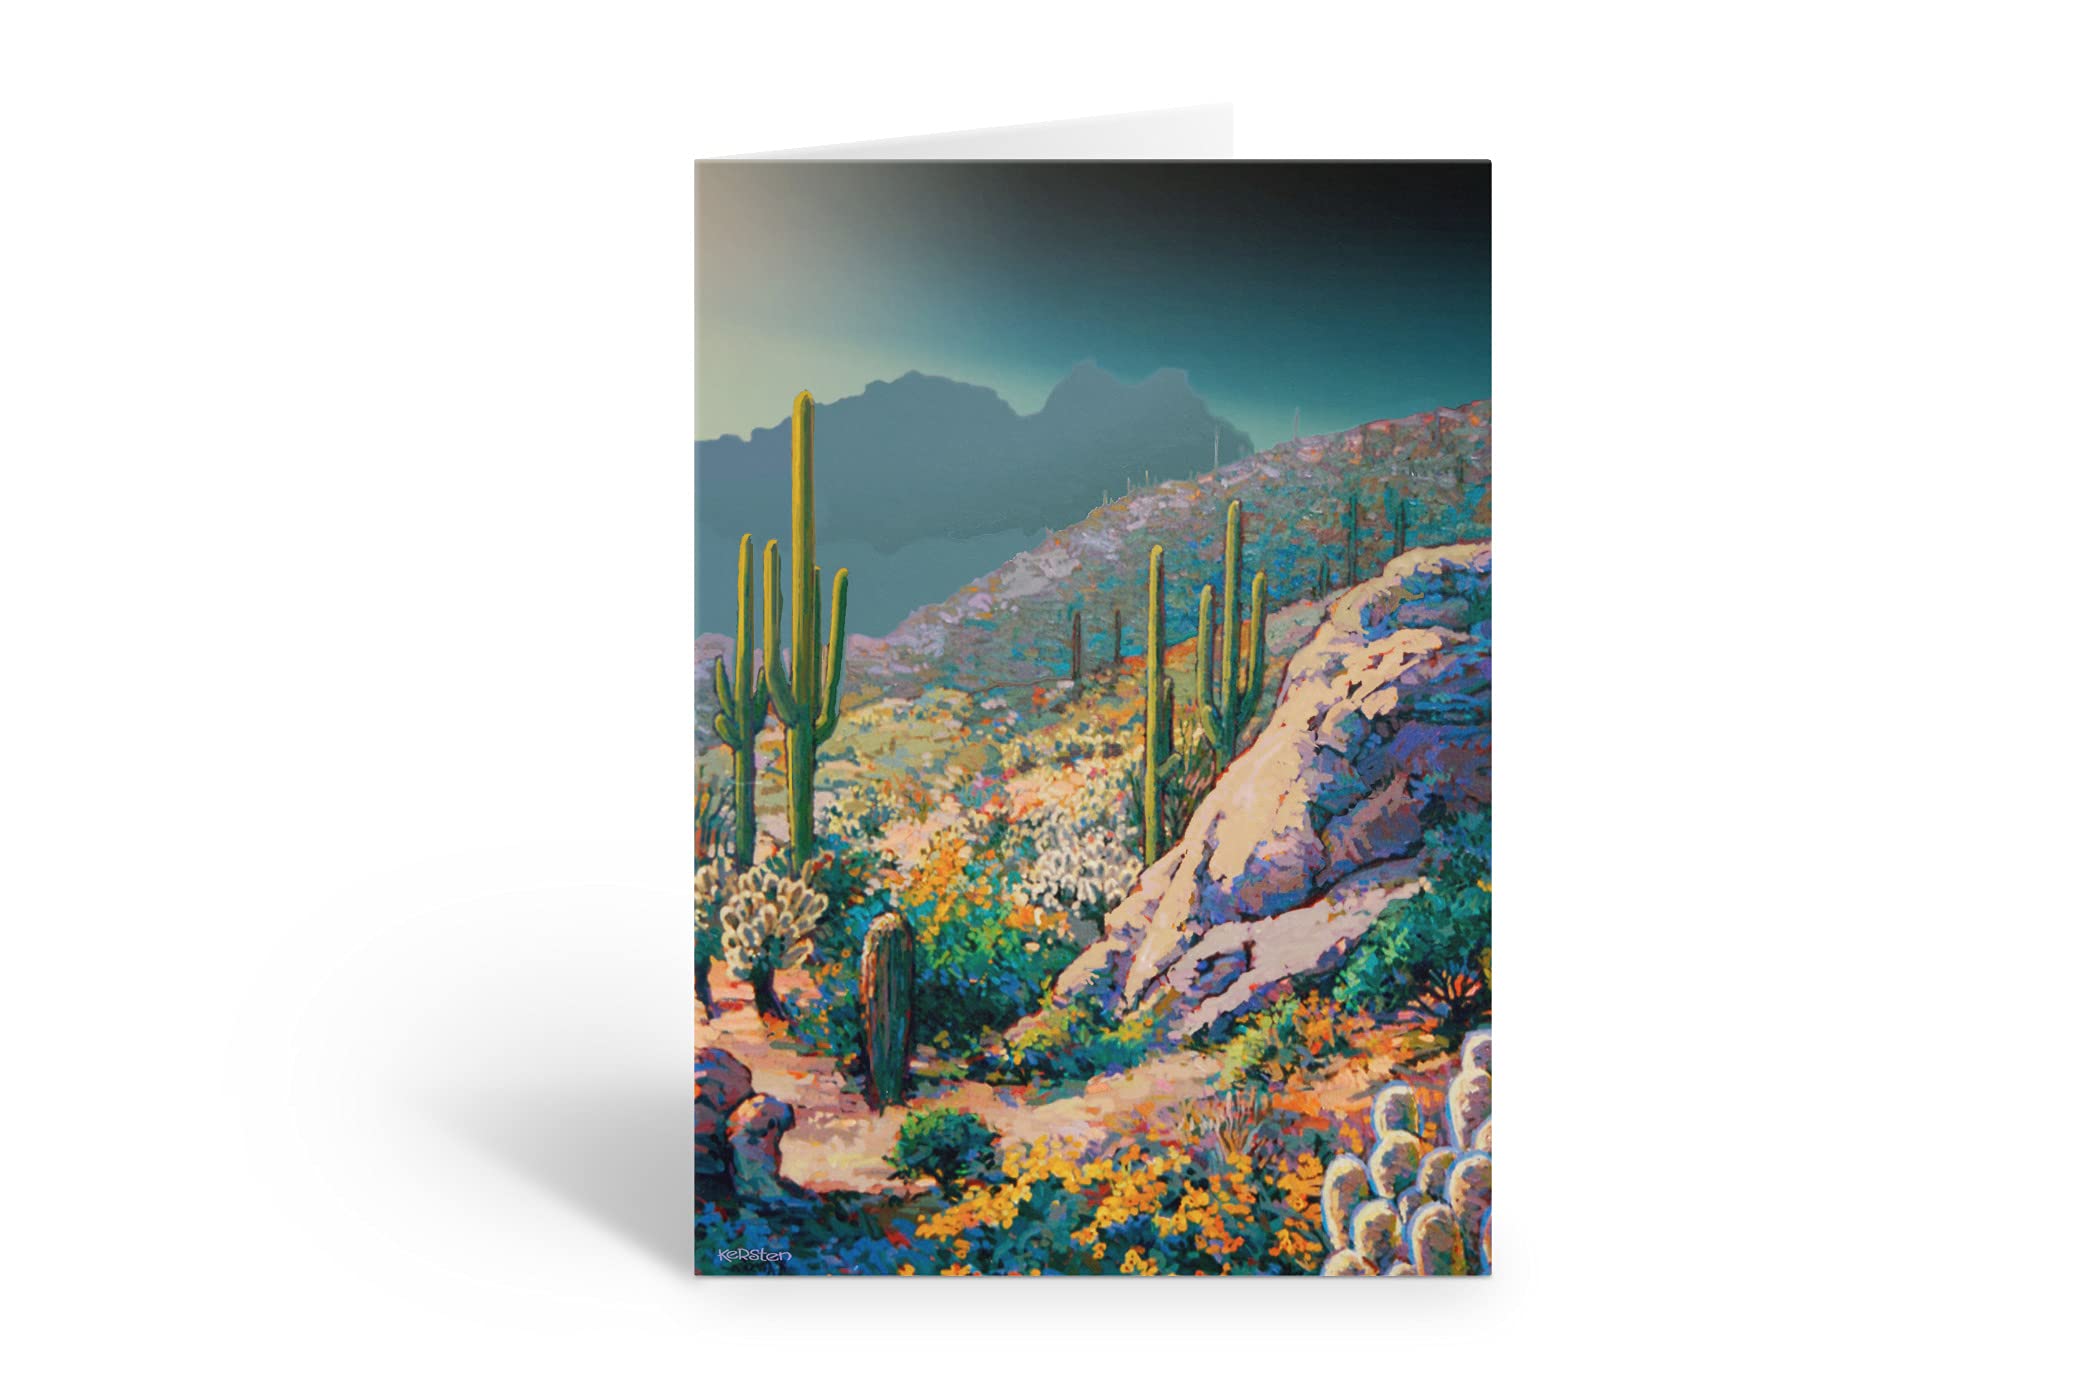 Stonehouse Collection | Arizona Mountain Note Cards - 10 Boxed Cards & Envelopes - Desert Mountain Note Cards (Assorted)